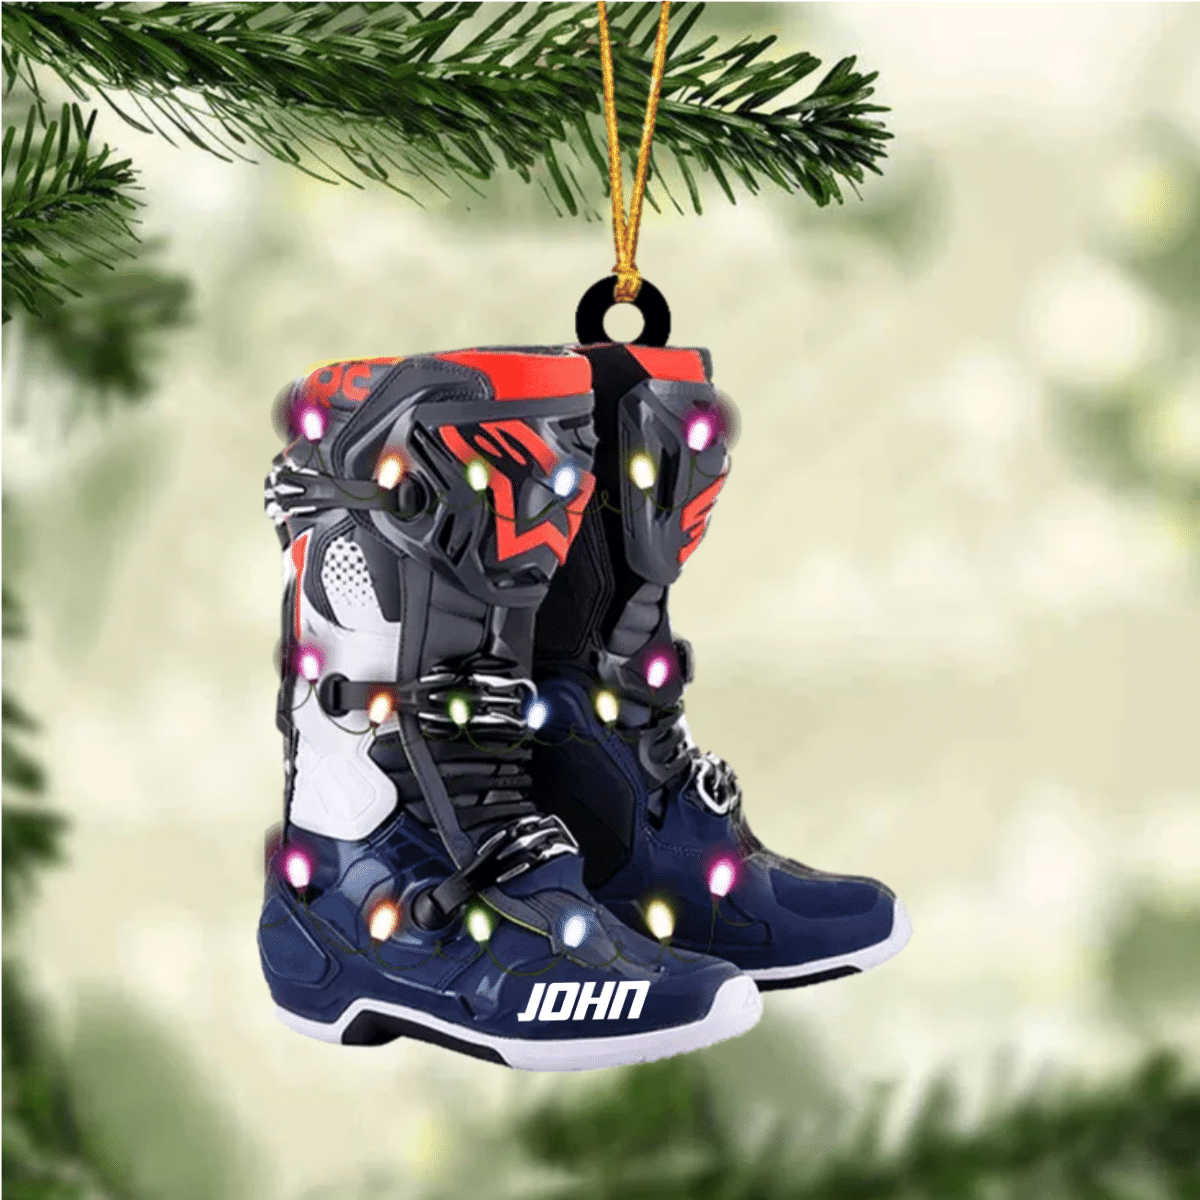 Personalized Ornament Motocross Boots Custom Shaped Acrylic Ornament for Motocross Lovers